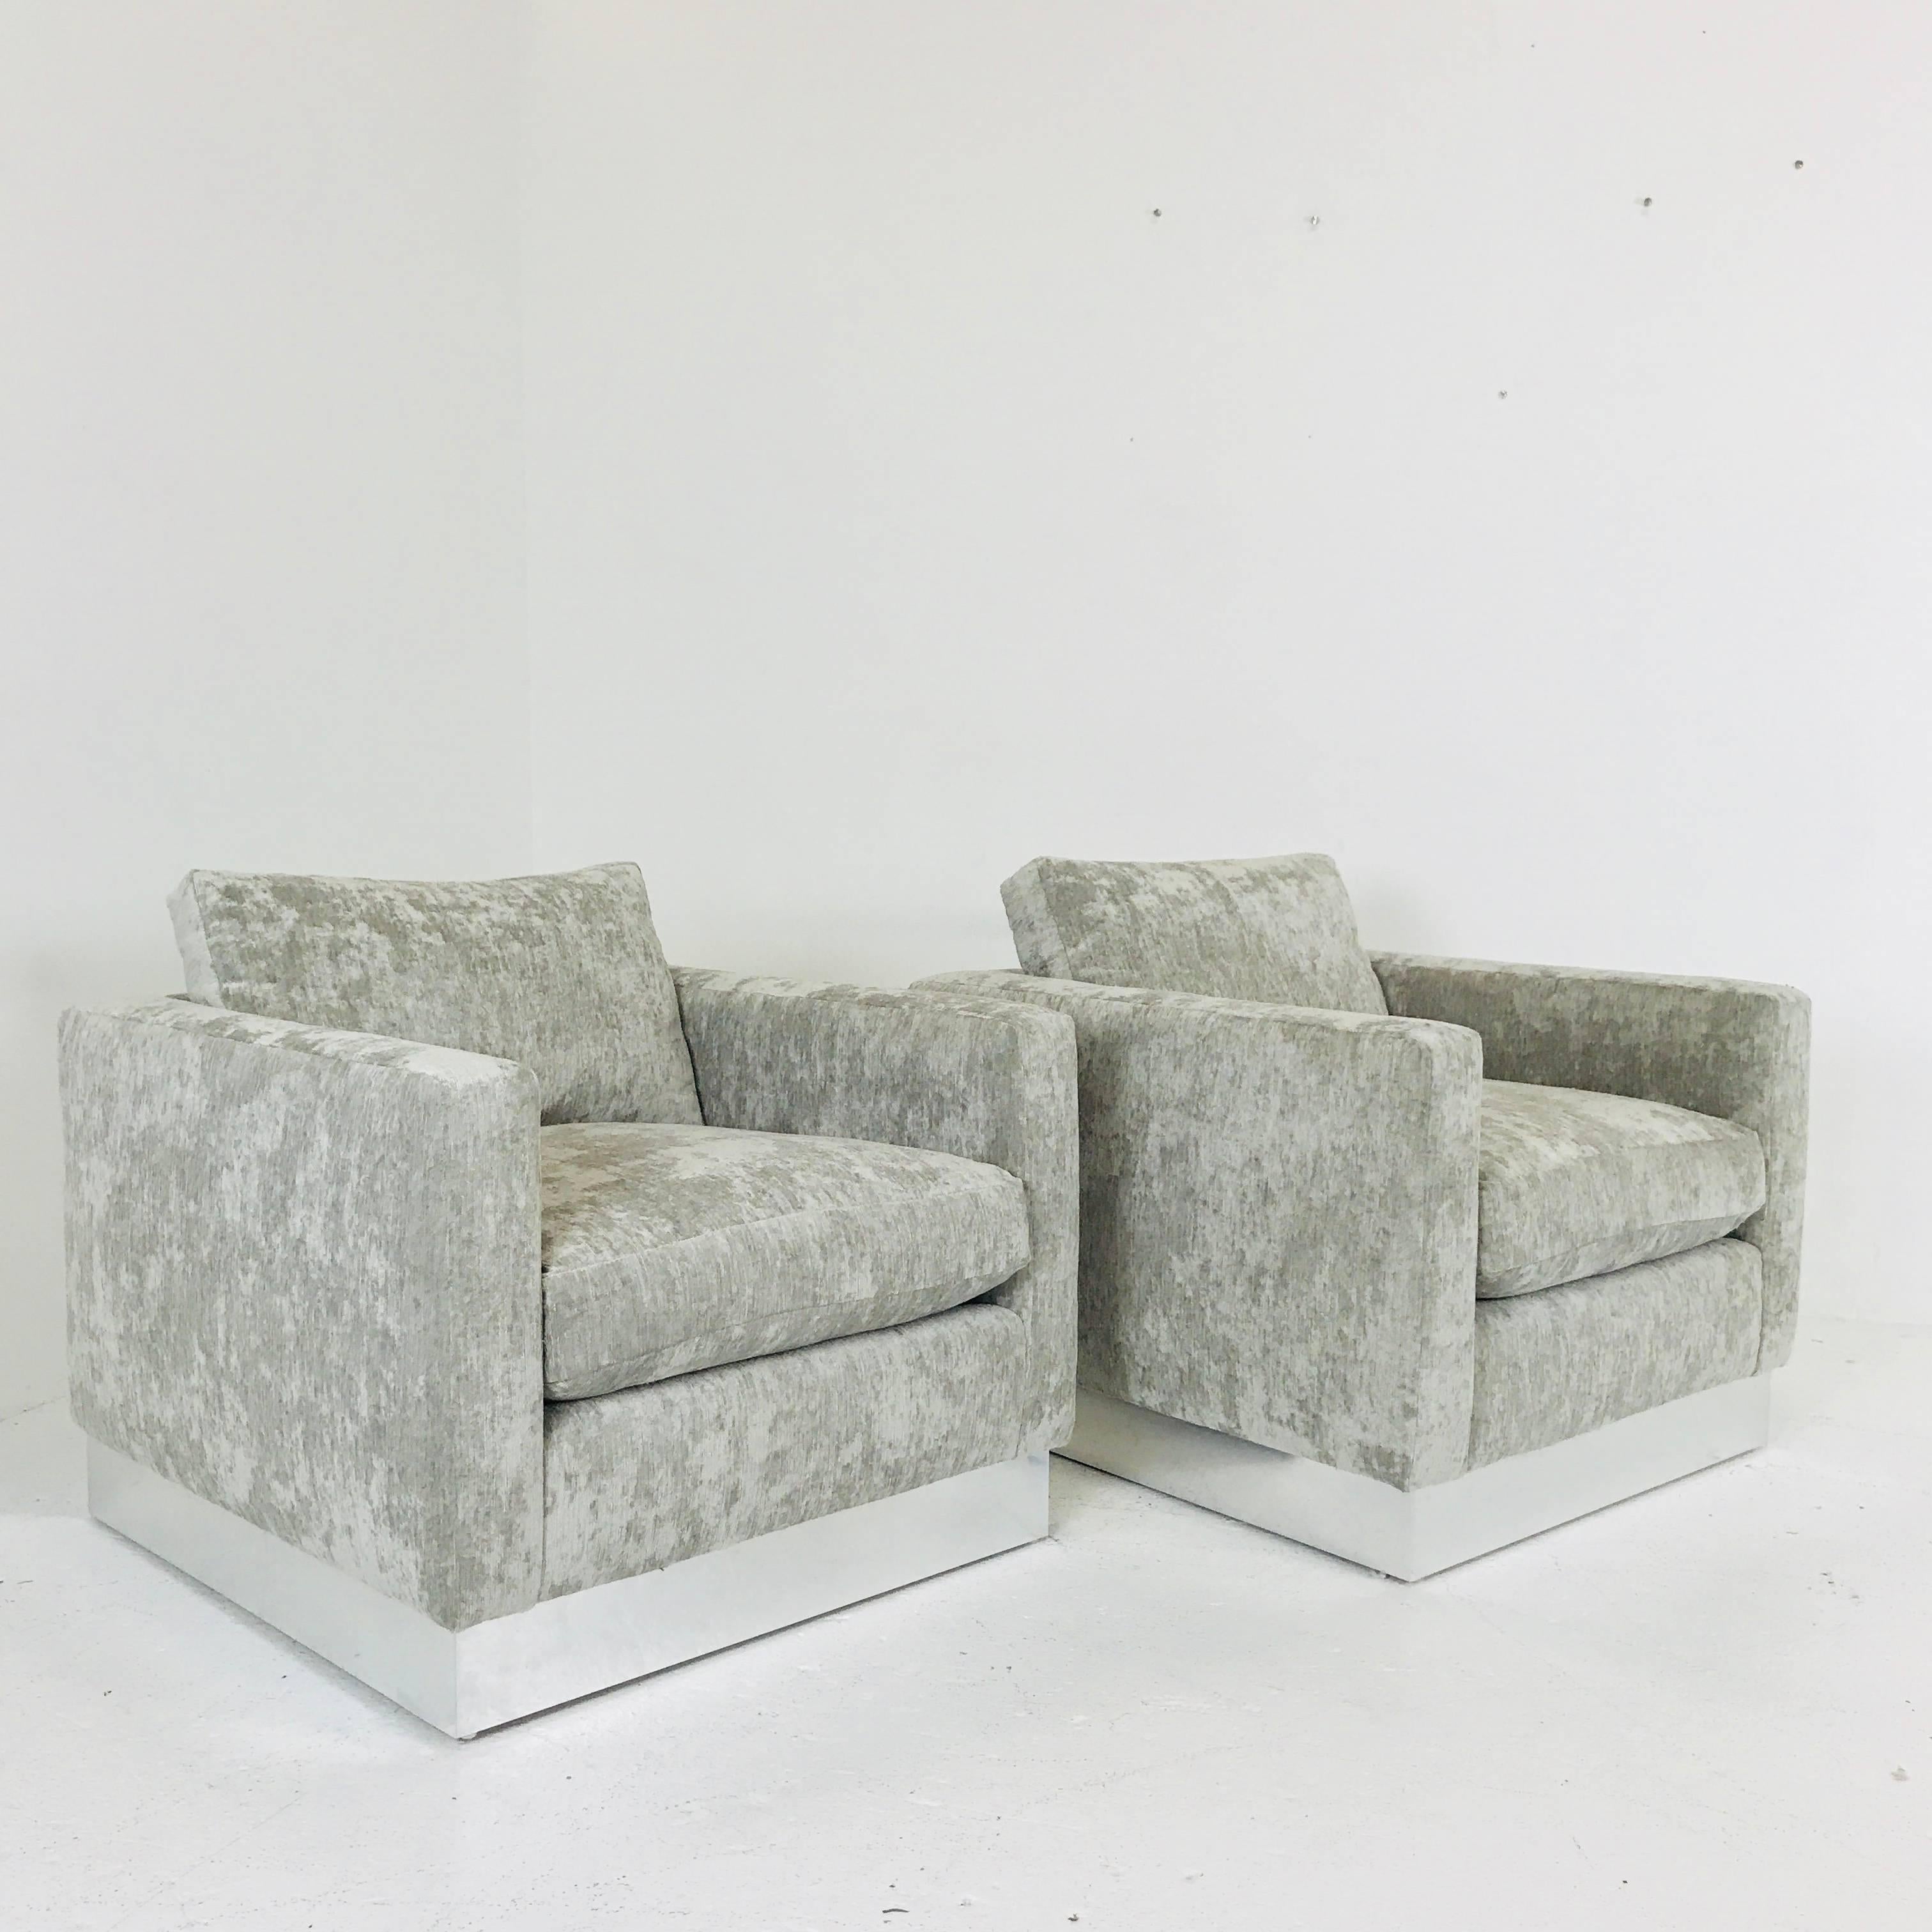 Mid-Century Modern Pair of Milo Baughman Cube Chairs with Plinth Base